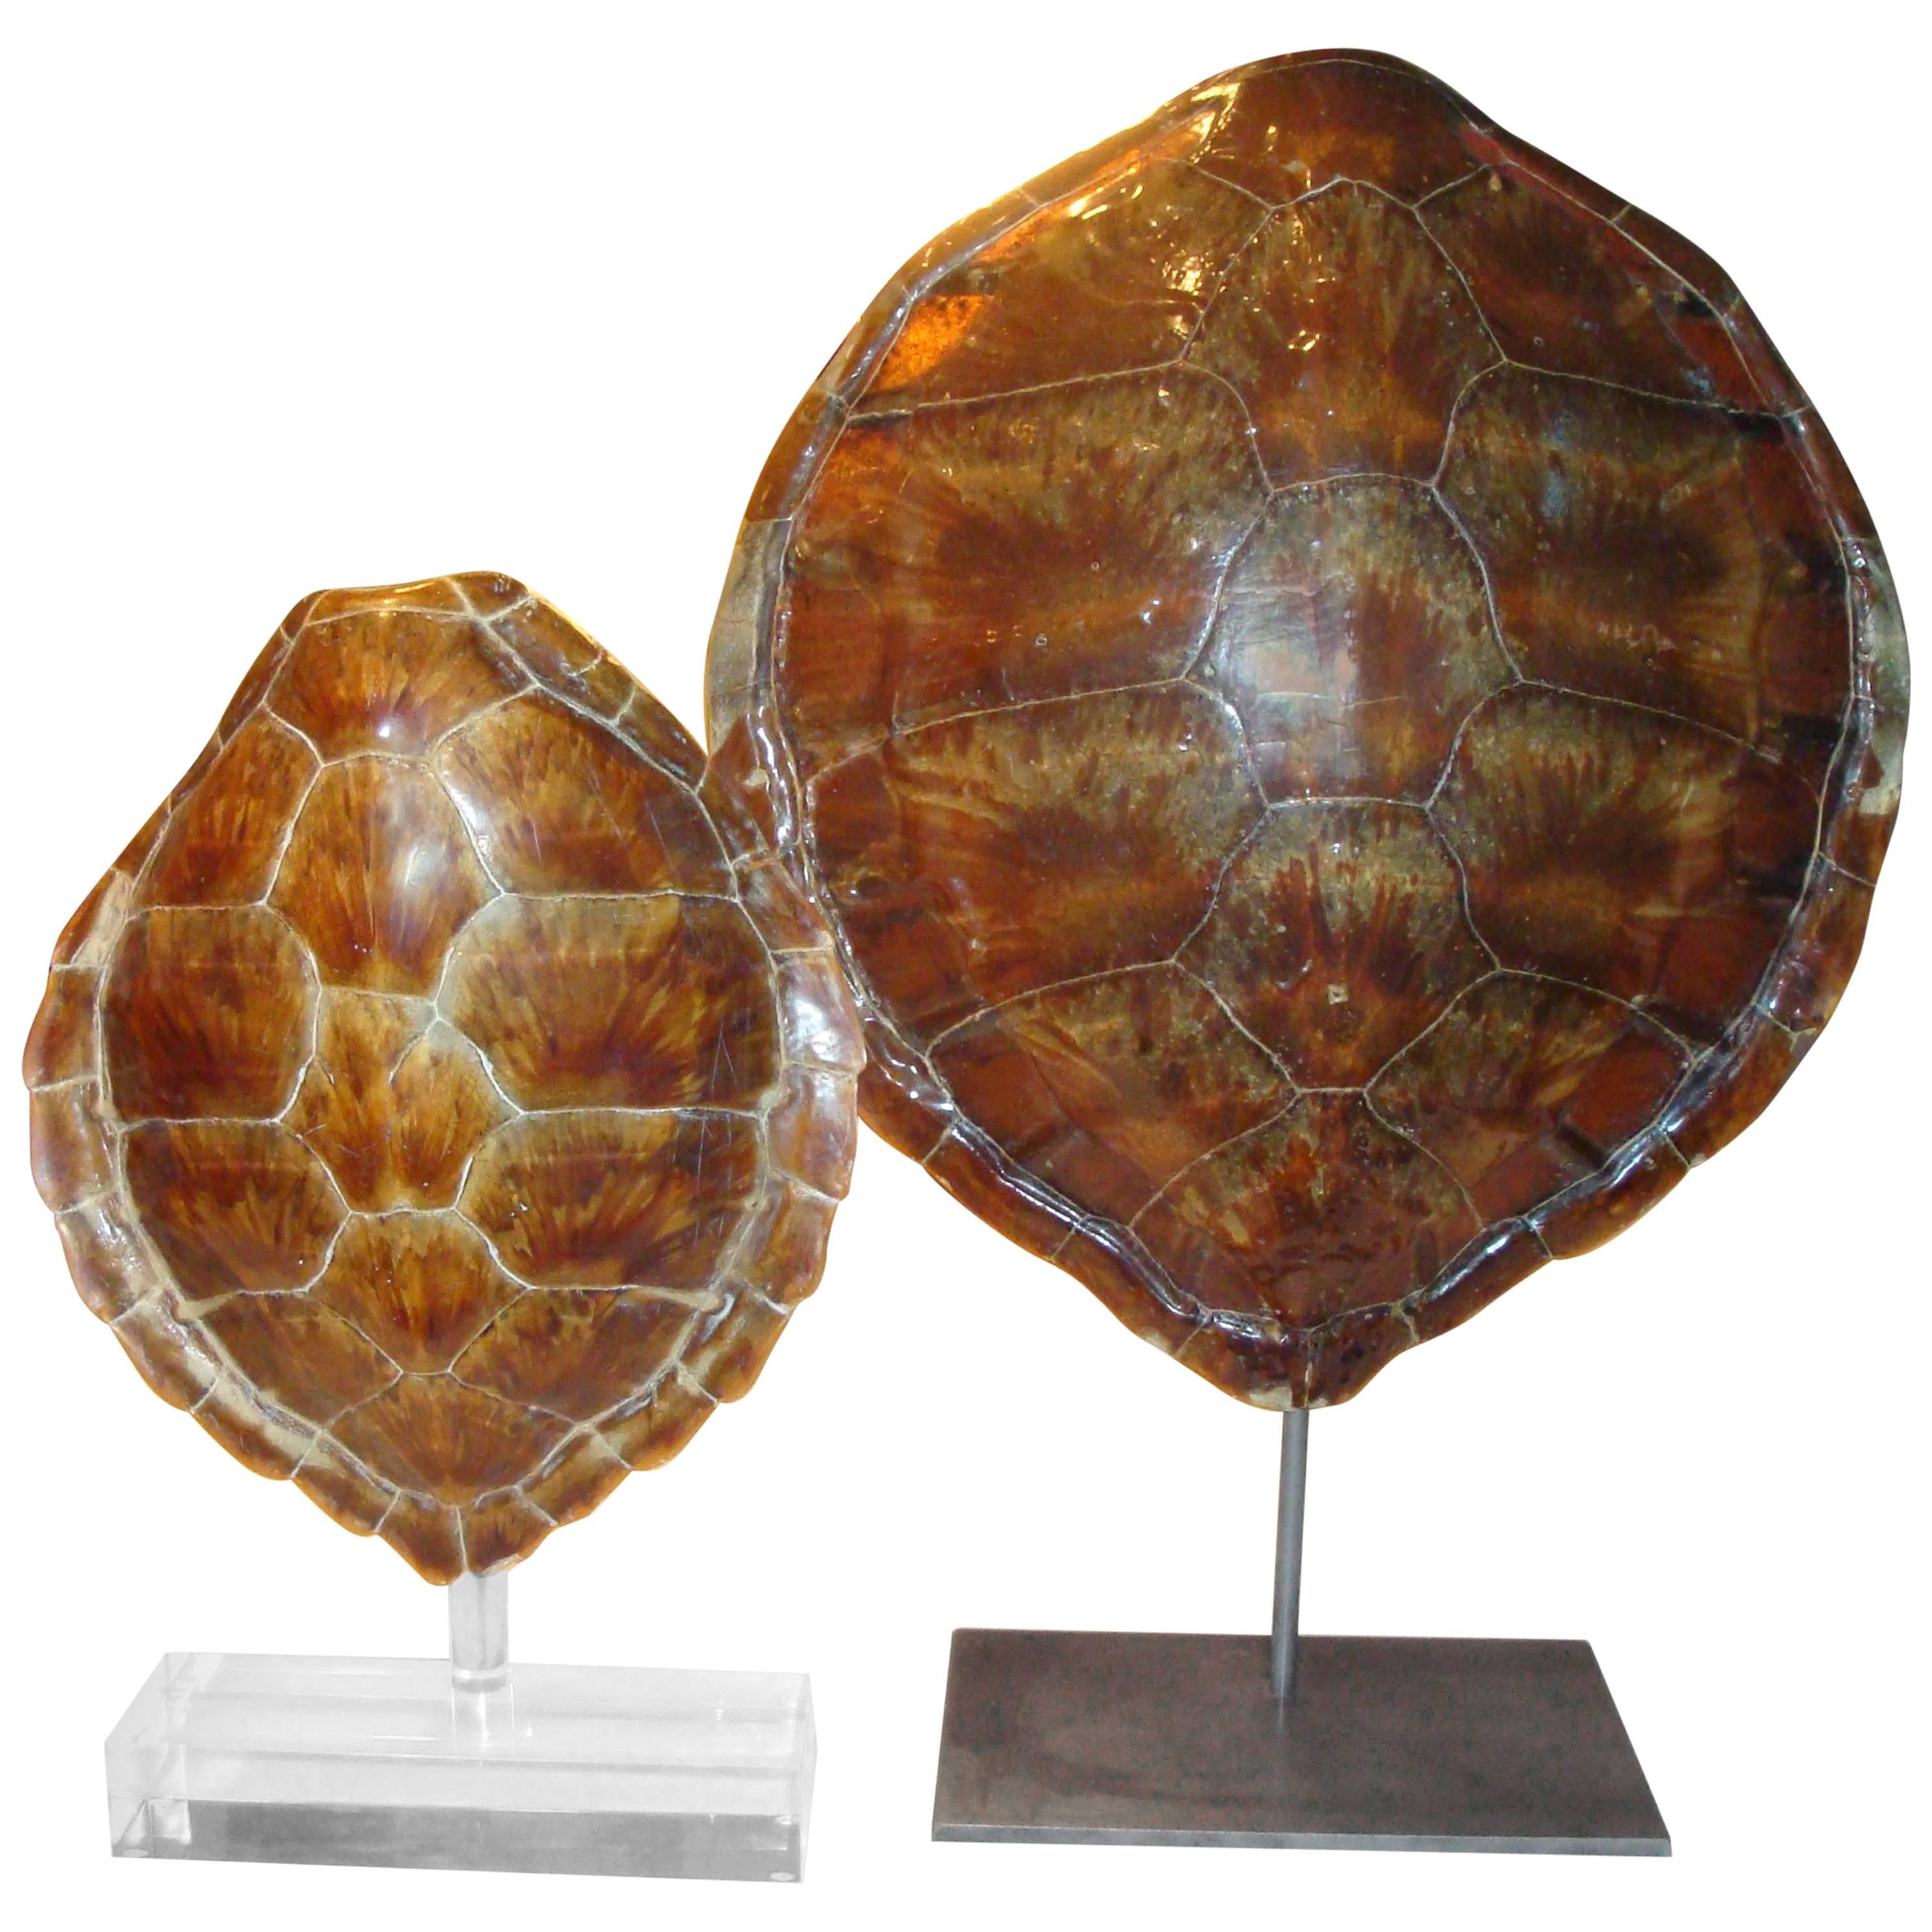 Pair of Antique Sea Turtles on Stands